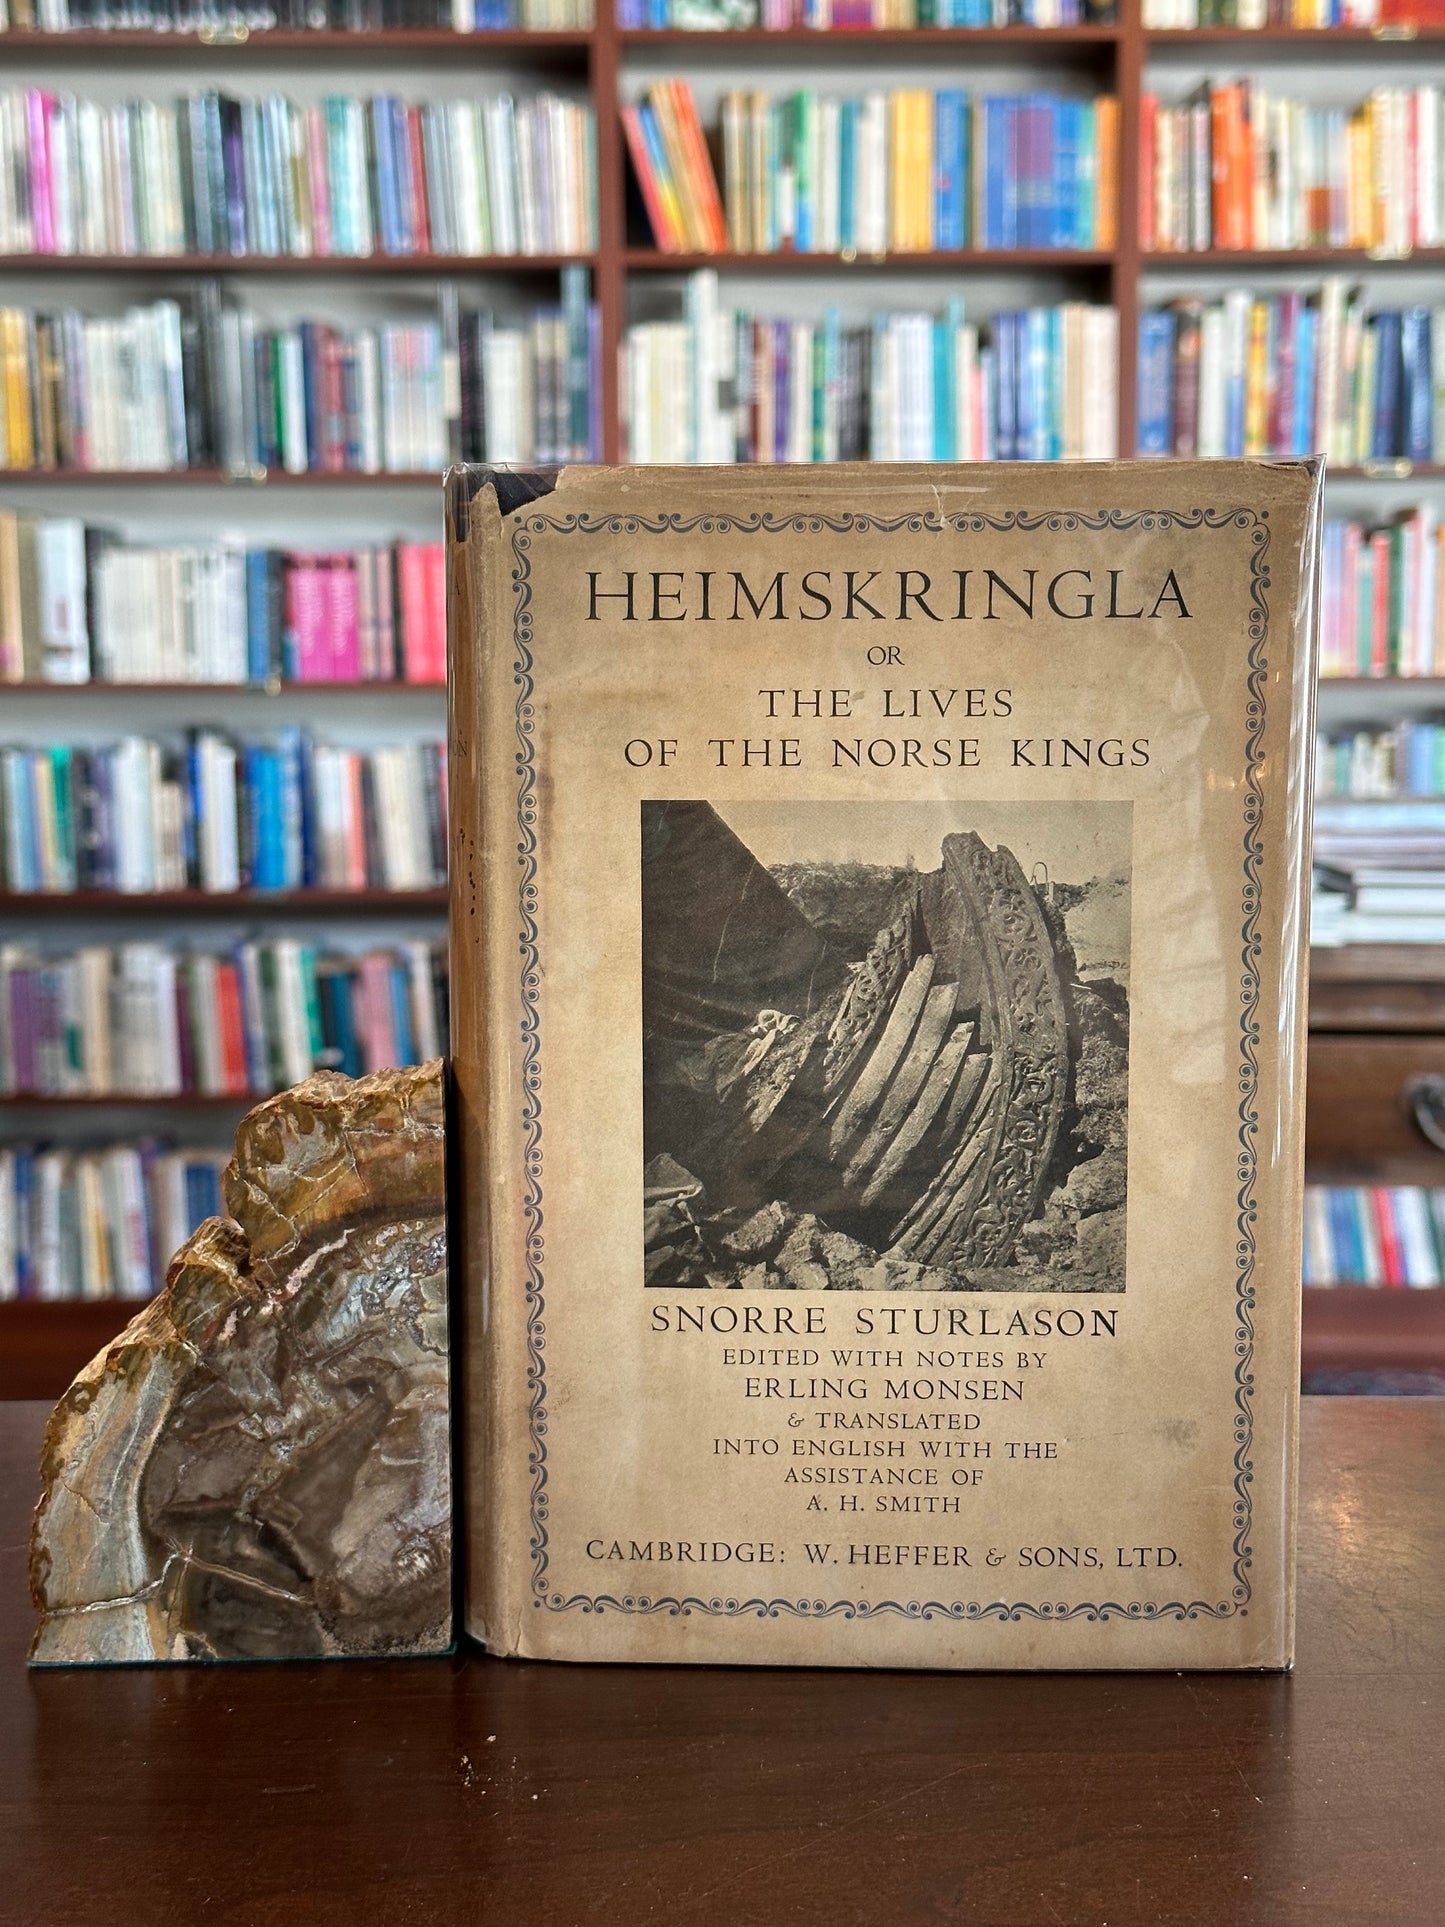 Heimskringla or The Lives of The Norse Kings by Snorre Sturlasson